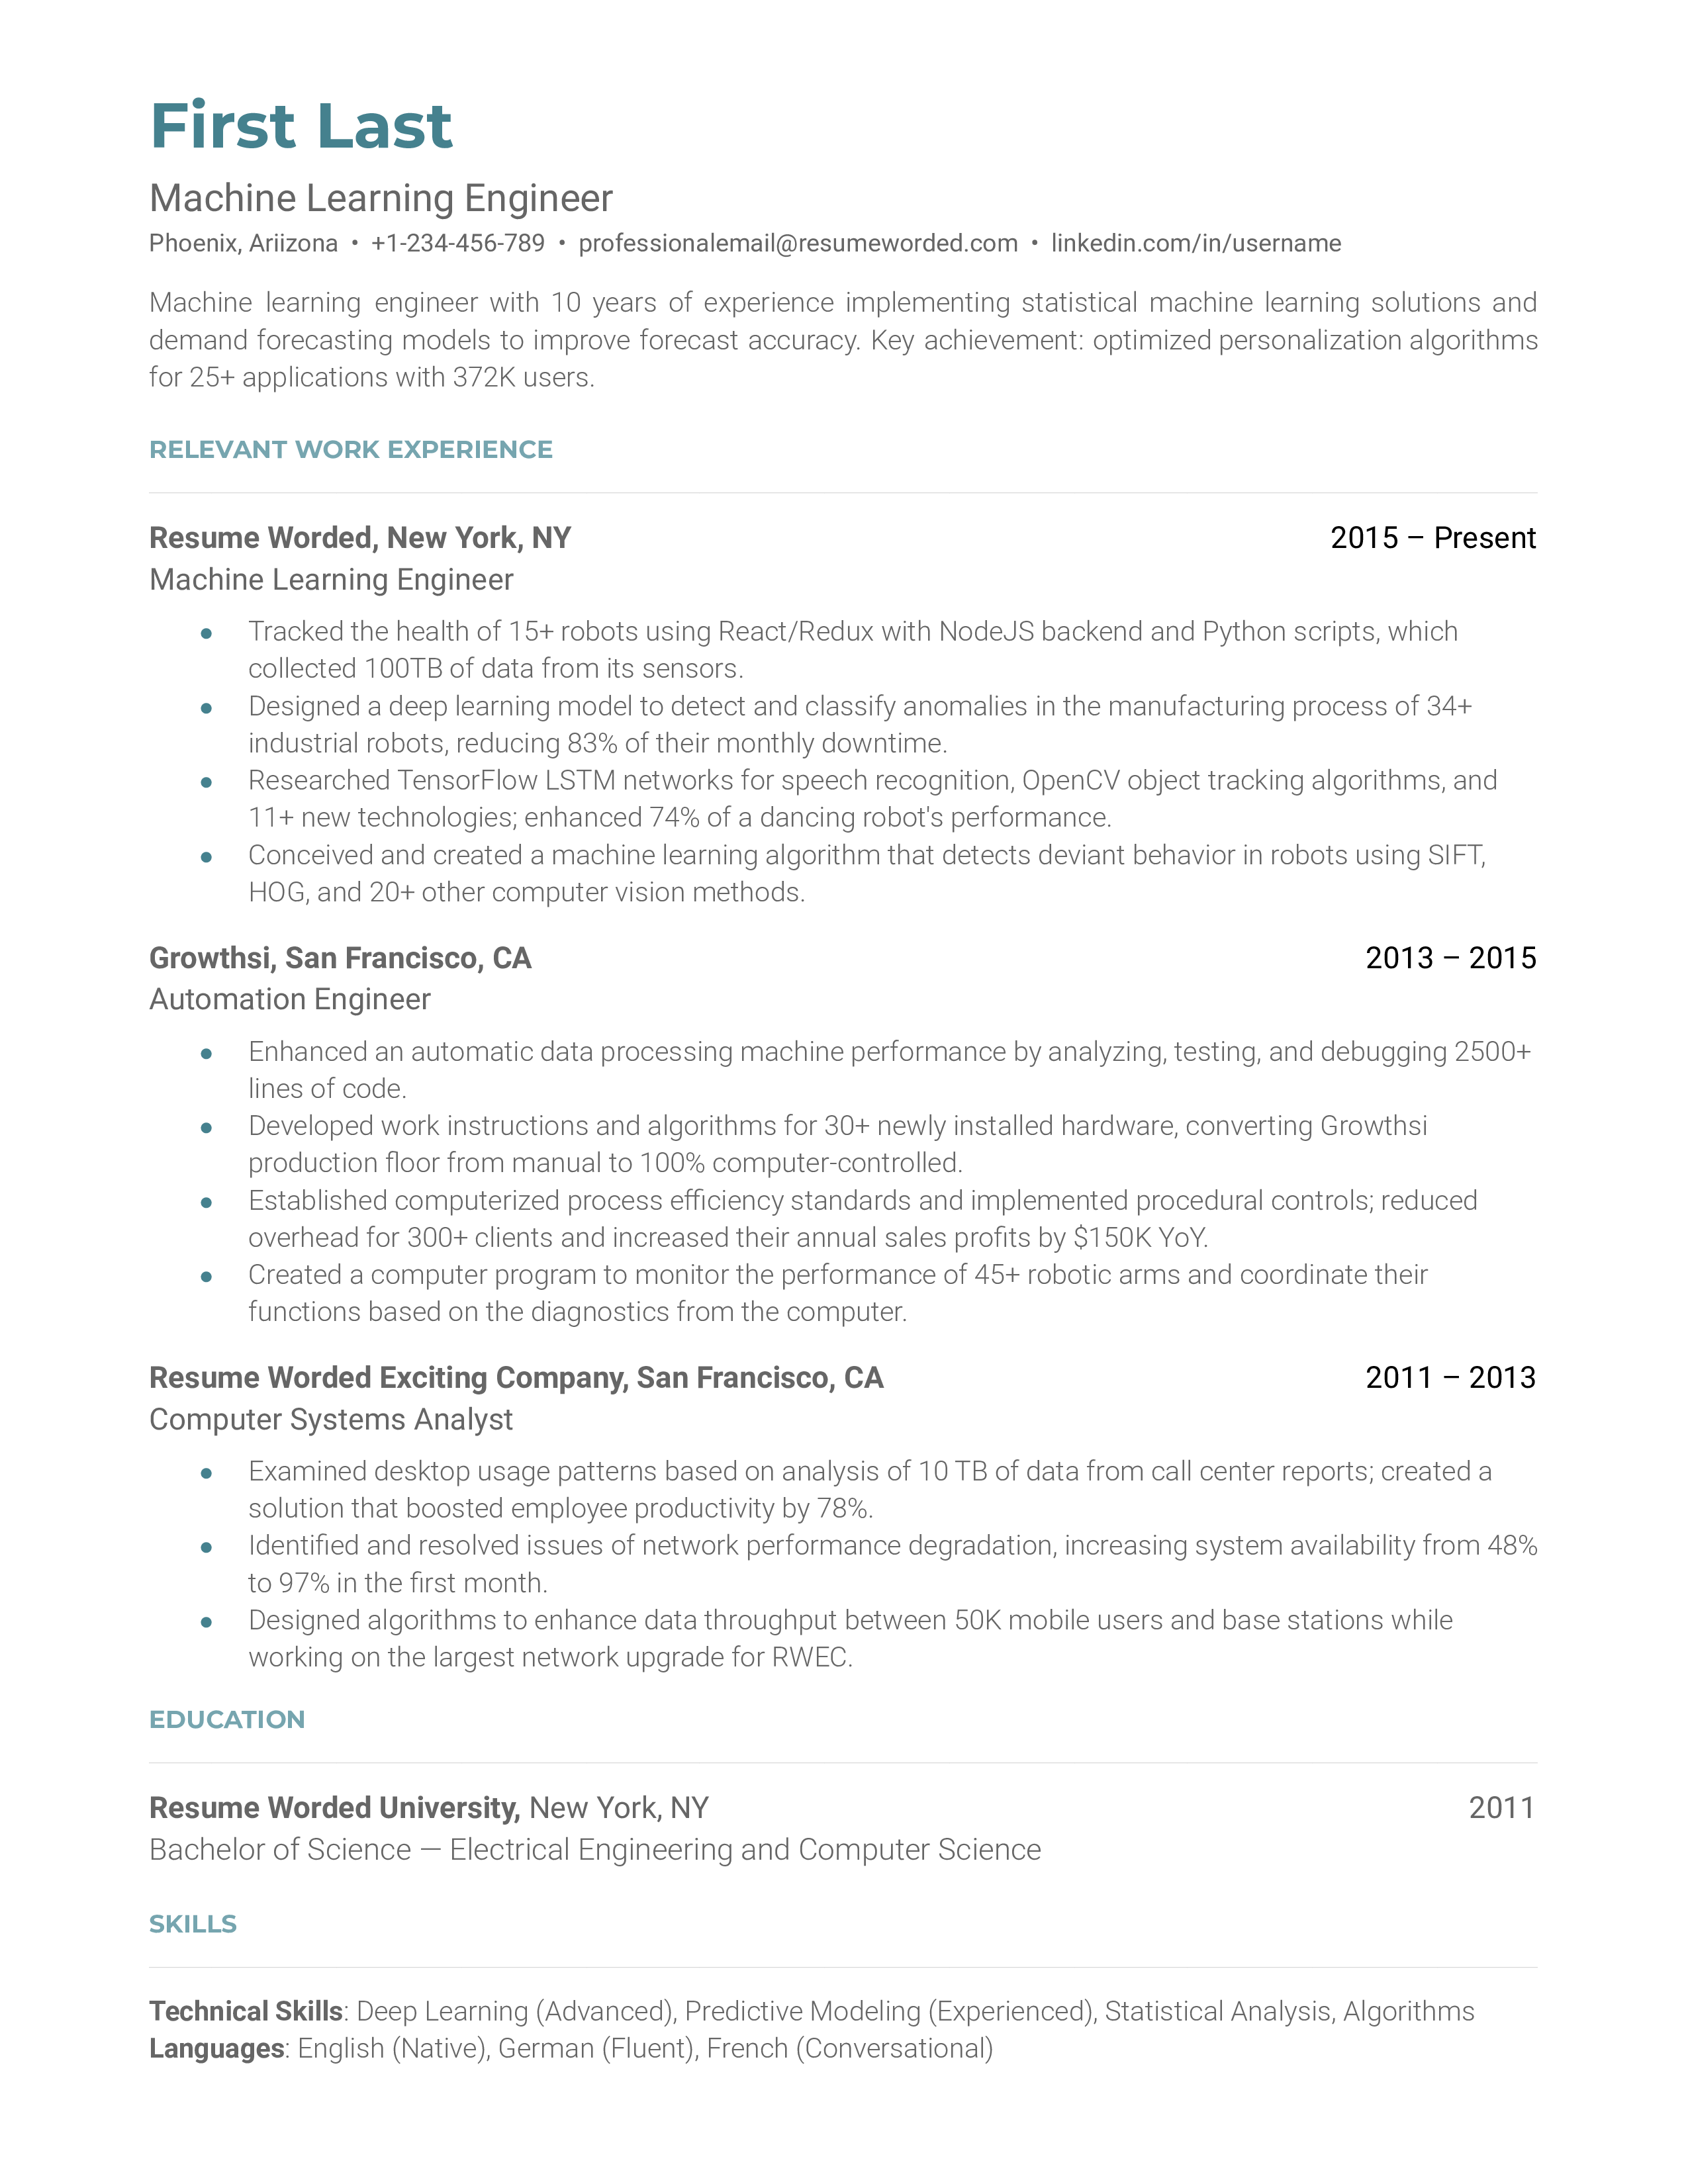 A machine learning engineer resume template prioritizing computer science experience.